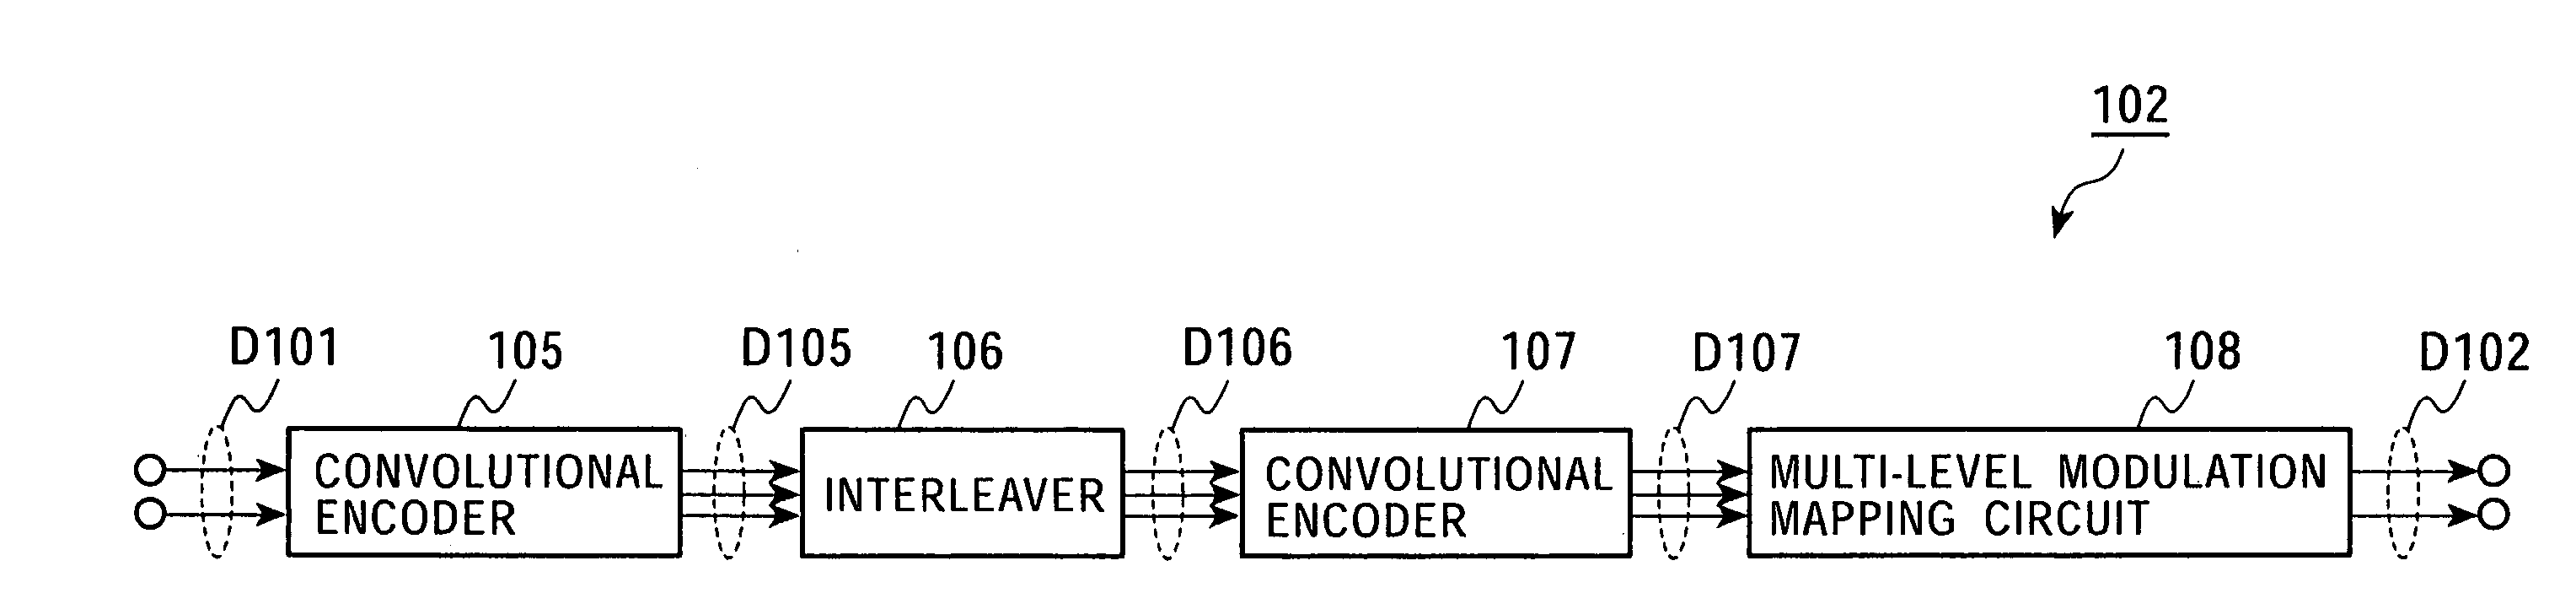 Encoding device for performing serial concatenated coding